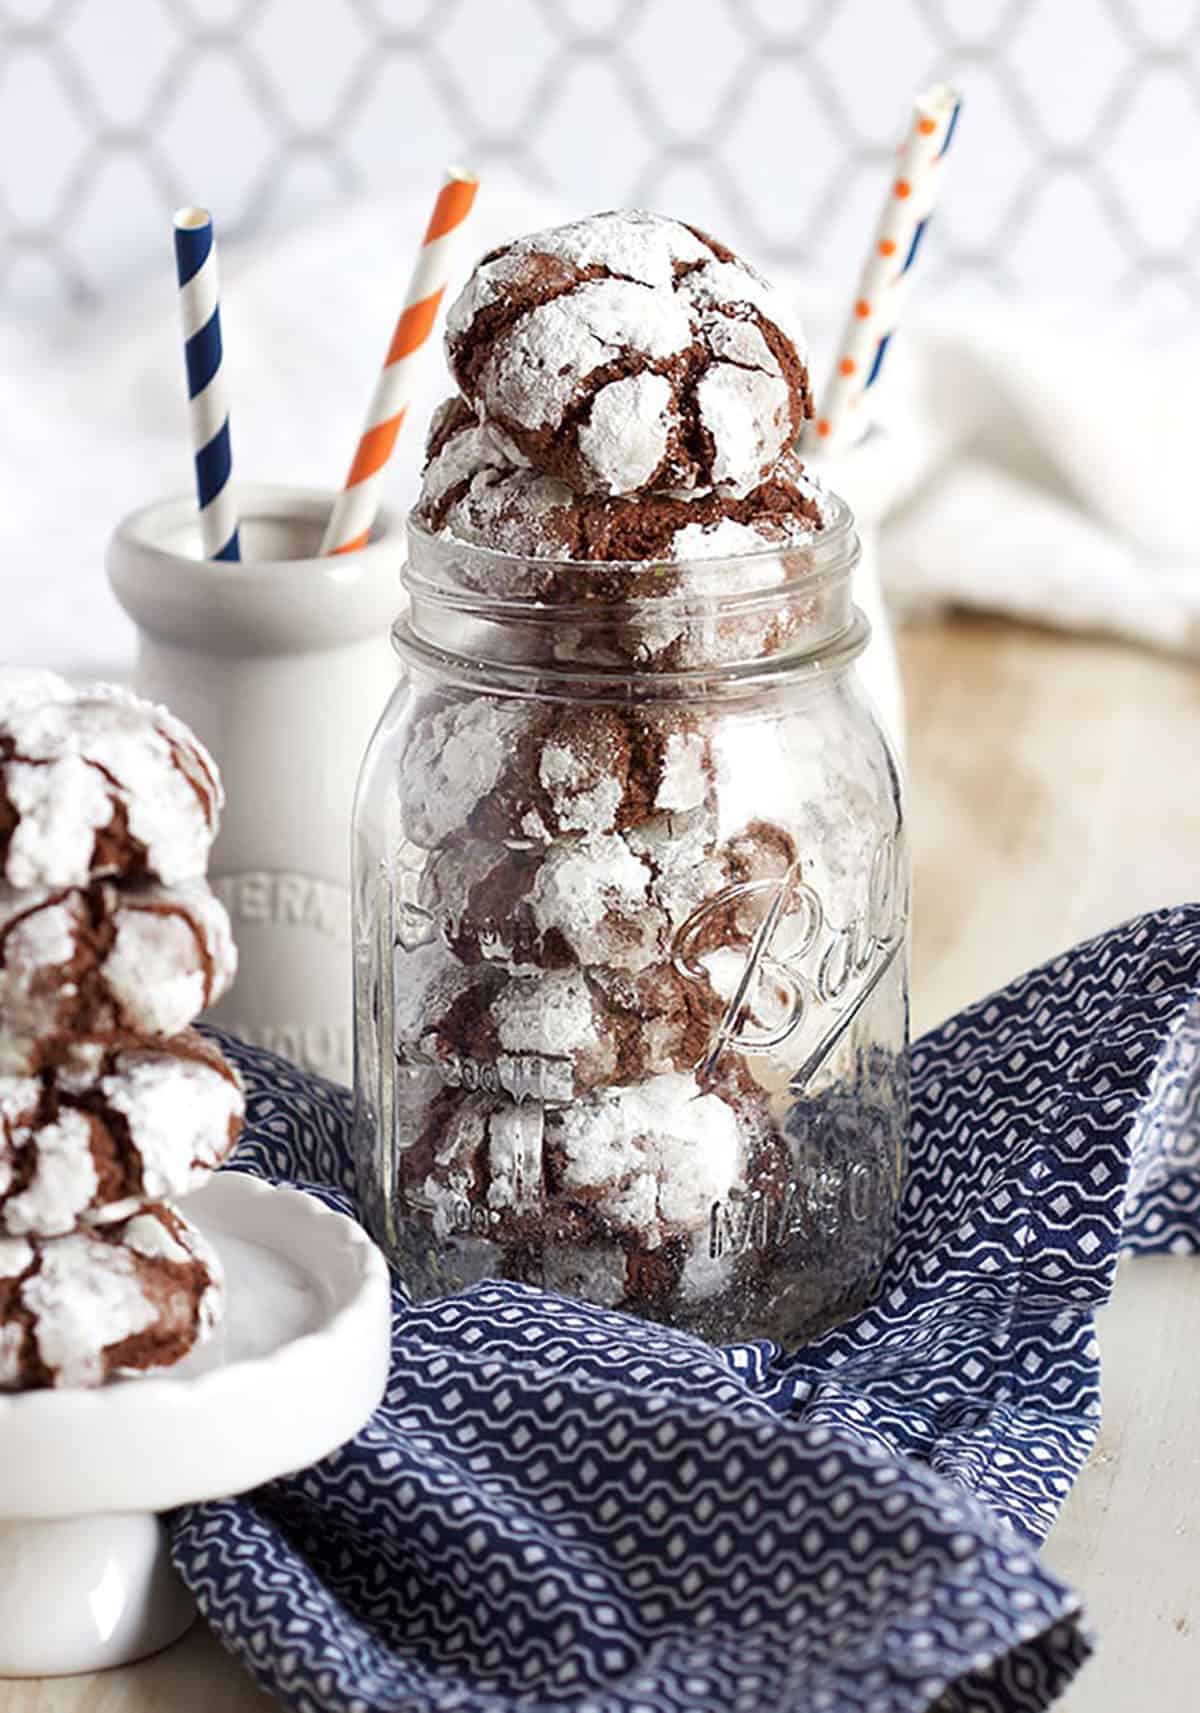 Chocolate Crinkle Cookies stacked in a canning jar.